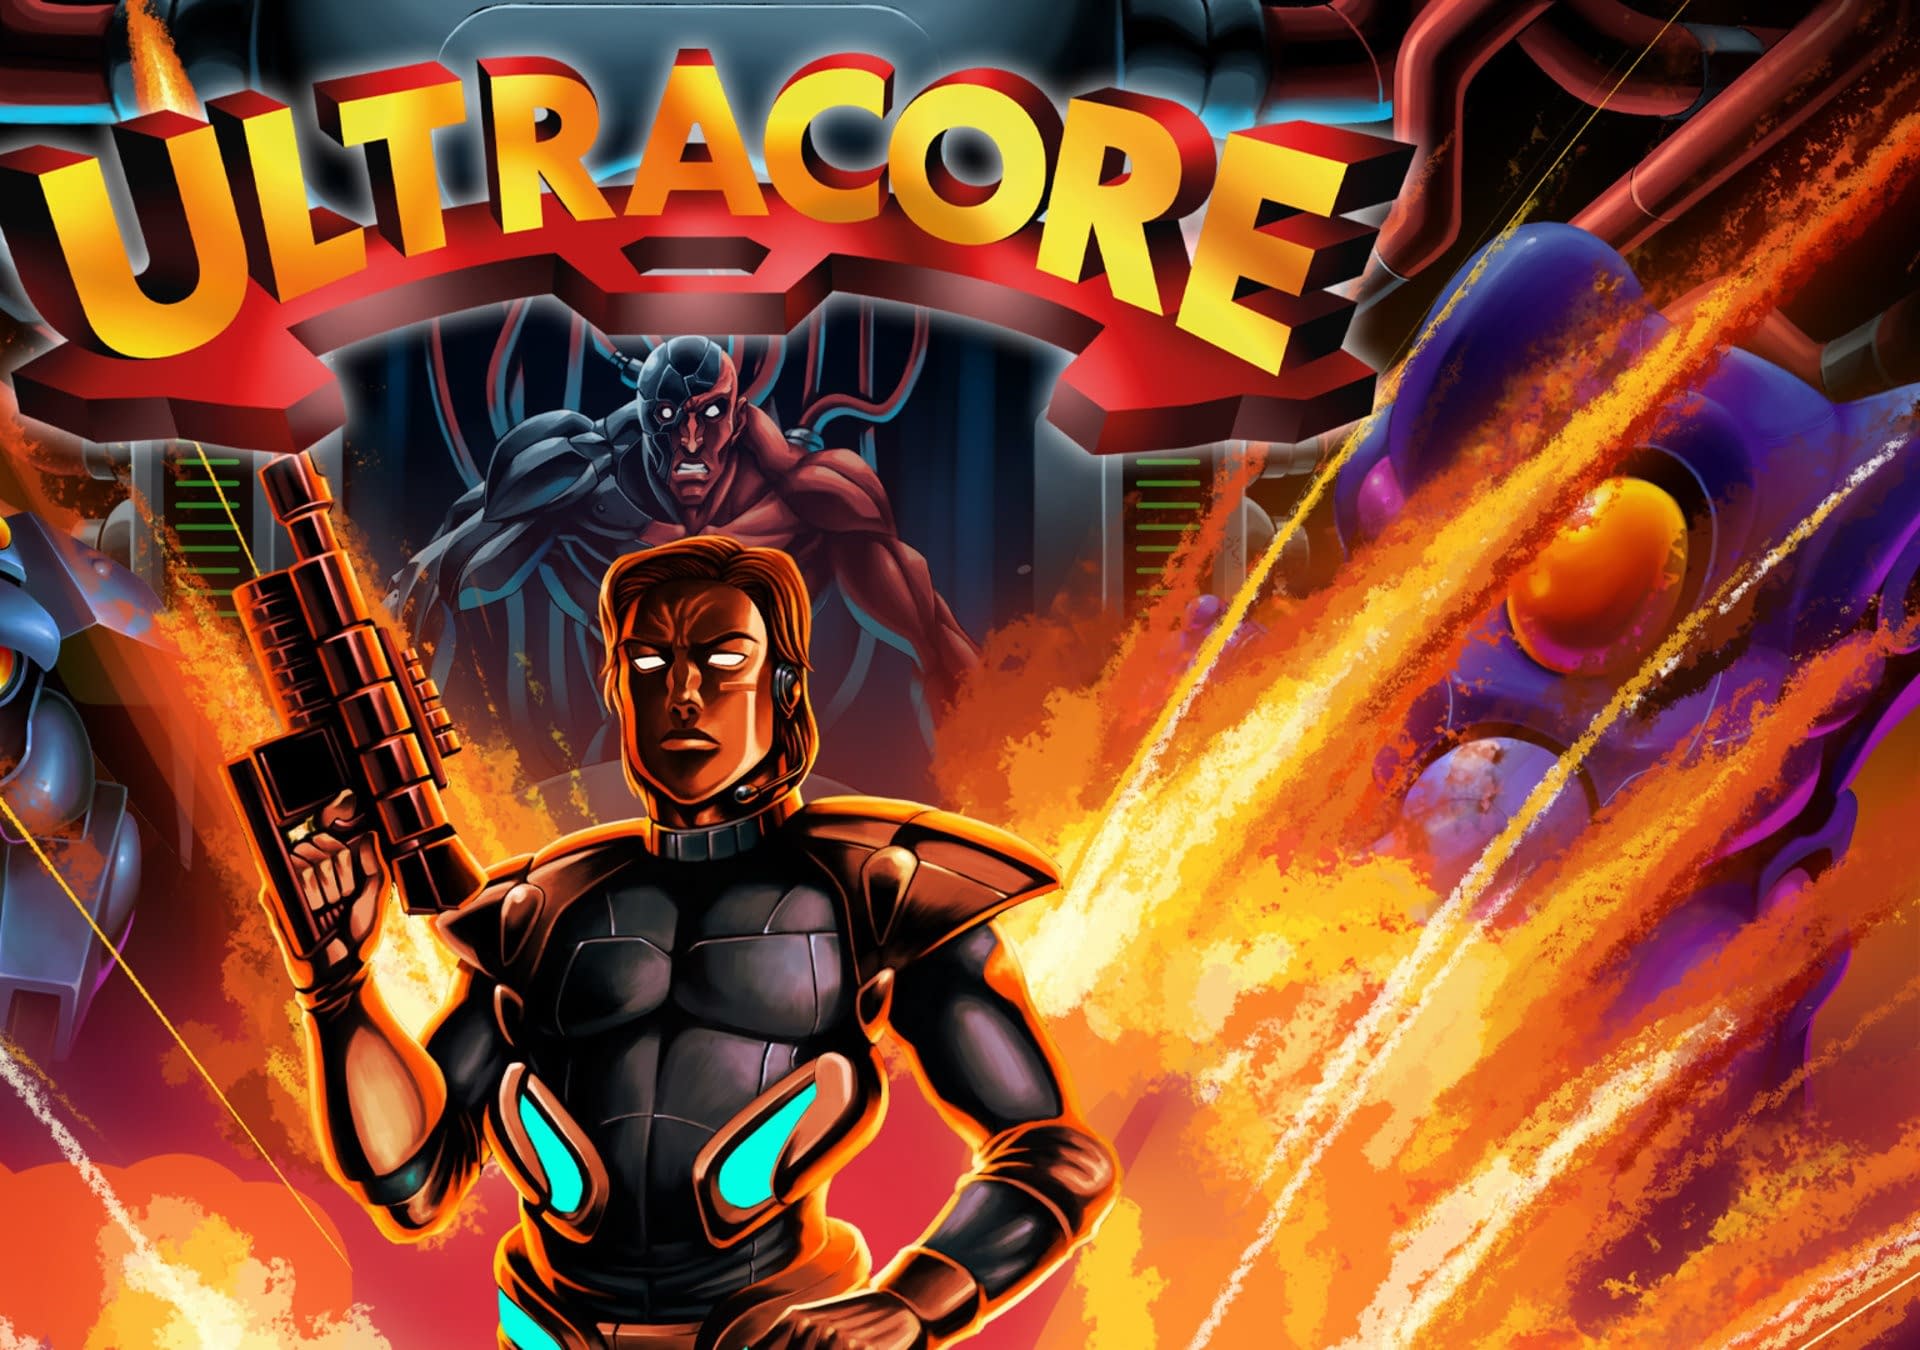 Ultracore Coming Soon to Xbox Consoles